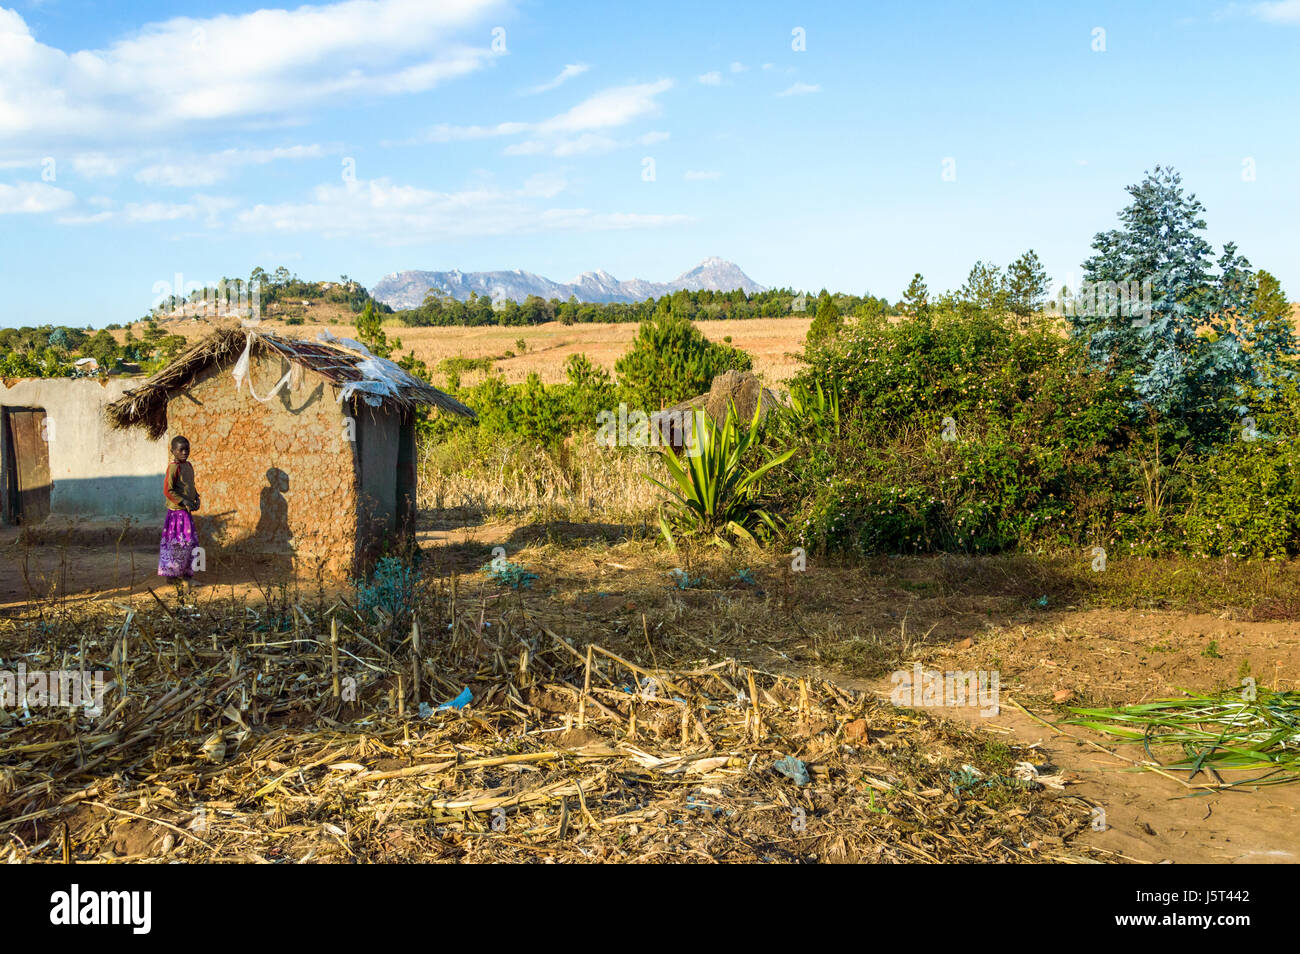 Girl stands outside traditionally built grass thatched mud hut over pit latrine in a rural village in Malawi, Africa Stock Photo